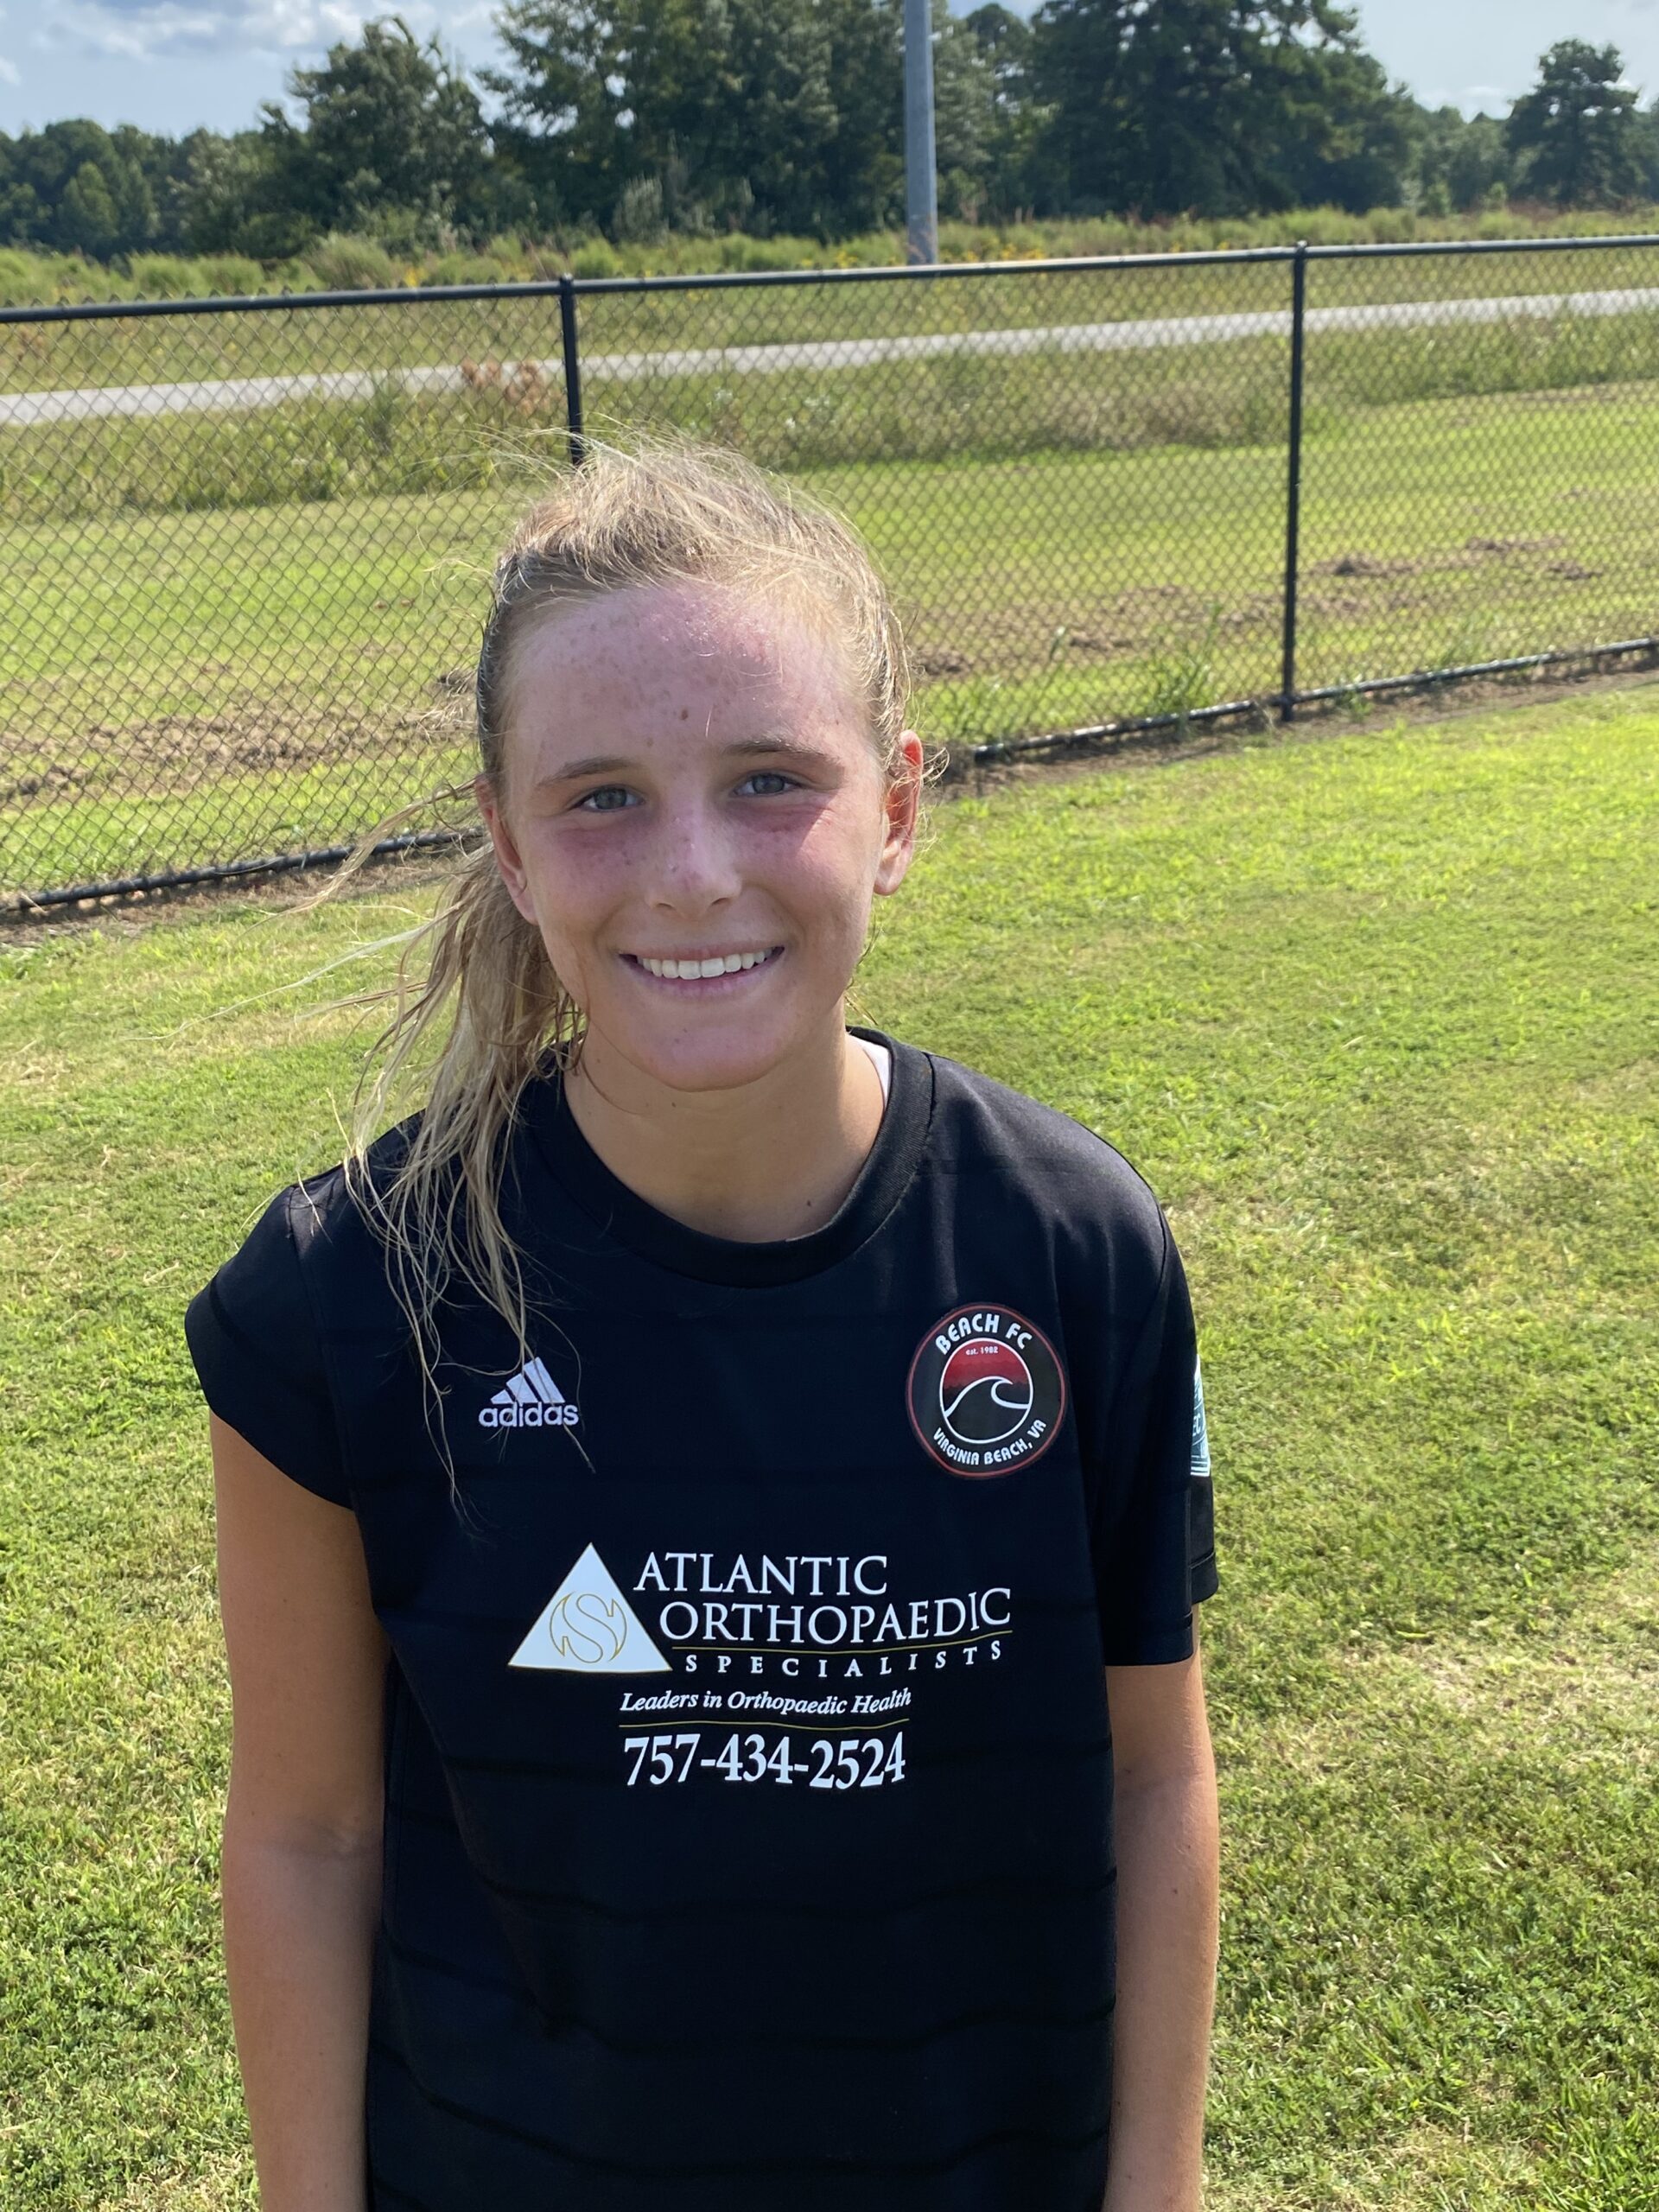 <span class="pn-tooltip pn-player-link">
        <span class="name-pointer">ECNL Mid-Atlantic 2006 Girls Who Impressed</span>
        <span class="info-box not-prose" style="background: linear-gradient(to bottom, rgba(212,175,55, 0.95) 0%,rgba(212,175,55, 1) 100%)">
            <a href="https://prepsoccer.com/2022/09/ecnl-mid-atlantic-2006-girls-who-impressed/" class="link-wrap">
                                    <span class="player-img"><img src="https://prepsoccer.com/wp-content/uploads/sites/8/2022/09/47449435-8A94-49BD-8443-ED9552E37EF8-scaled.jpeg?w=150&h=150&crop=1" alt="ECNL Mid-Atlantic 2006 Girls Who Impressed"></span>
                
                <span class="player-details">
                    <span class="first-name">ECNL</span>
                    <span class="last-name">Mid-Atlantic 2006 Girls Who Impressed</span>
                    <span class="measurables">
                                            </span>
                                    </span>
                <span class="player-rank">
                                                        </span>
                                    <span class="state-abbr"></span>
                            </a>

            
        </span>
    </span>
